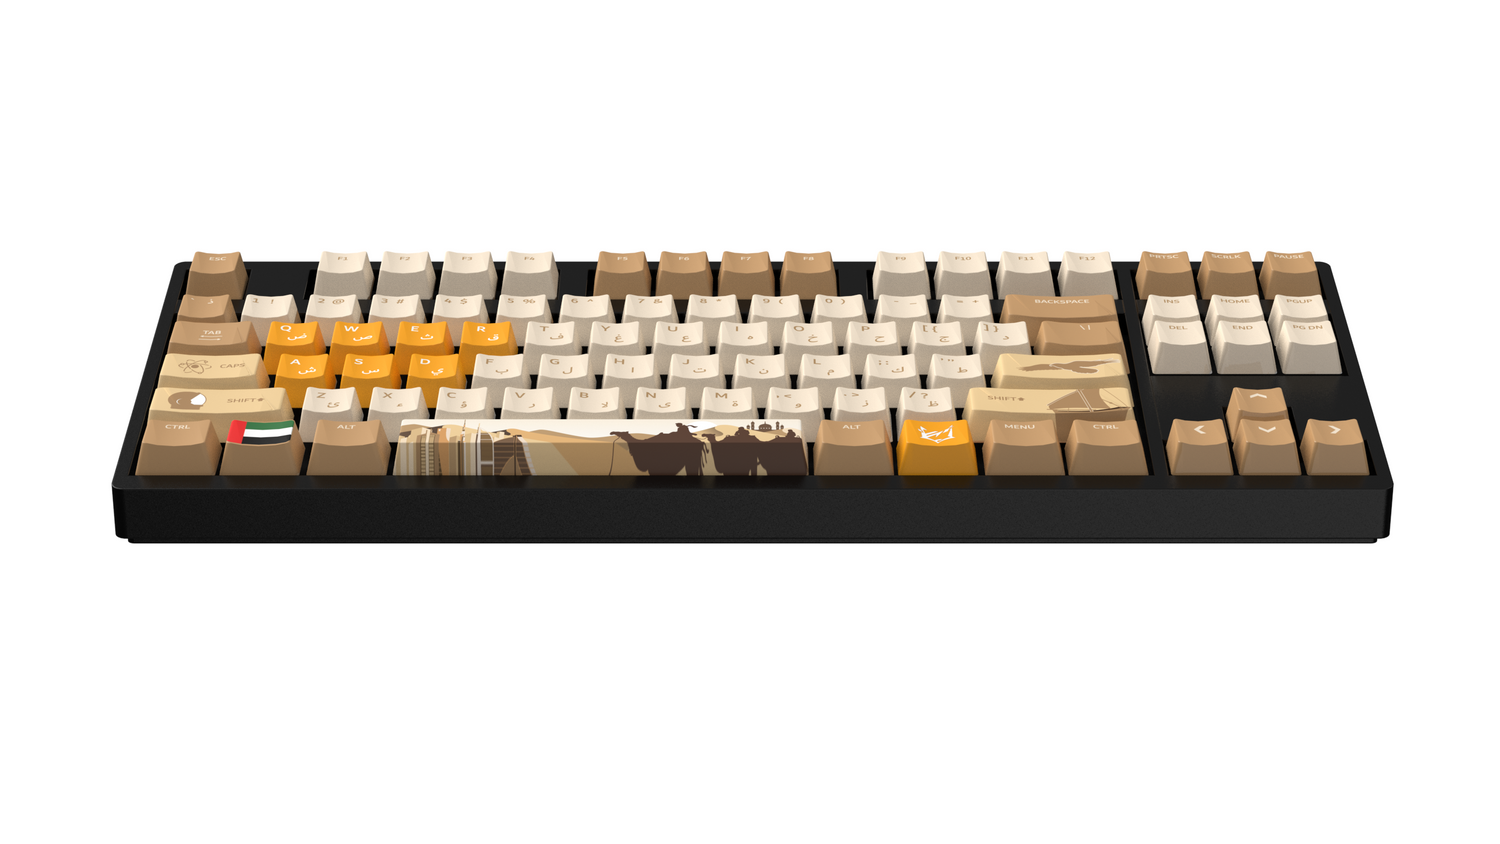 Mirage-87 Limited Edition Keyboard